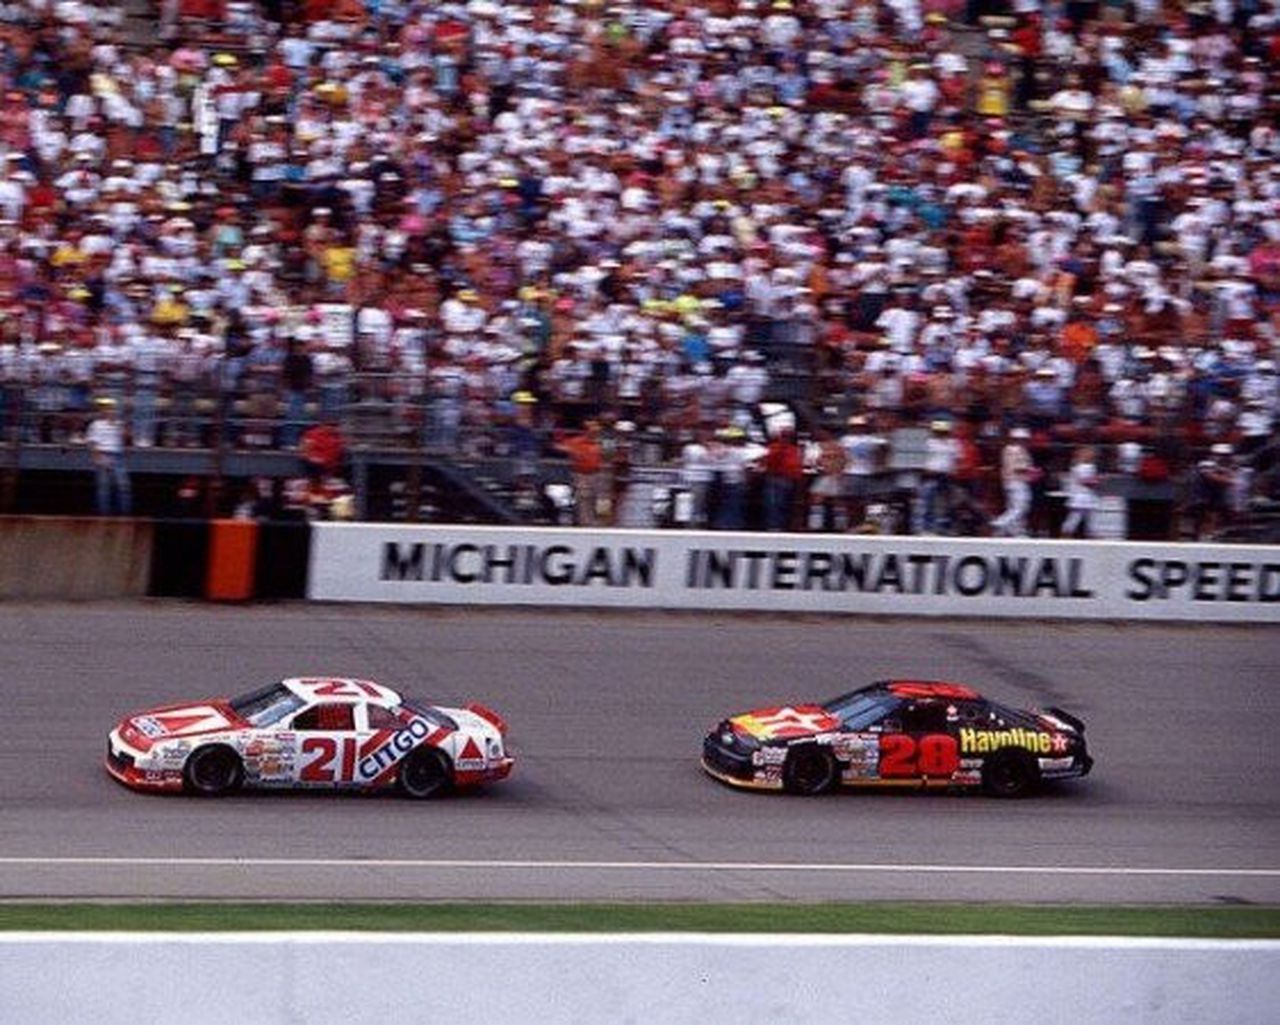 Significantly, Dale Jarrett, then at age 34, bested Davey Allison at Michigan in 1991. (Photo: ISC Archives)